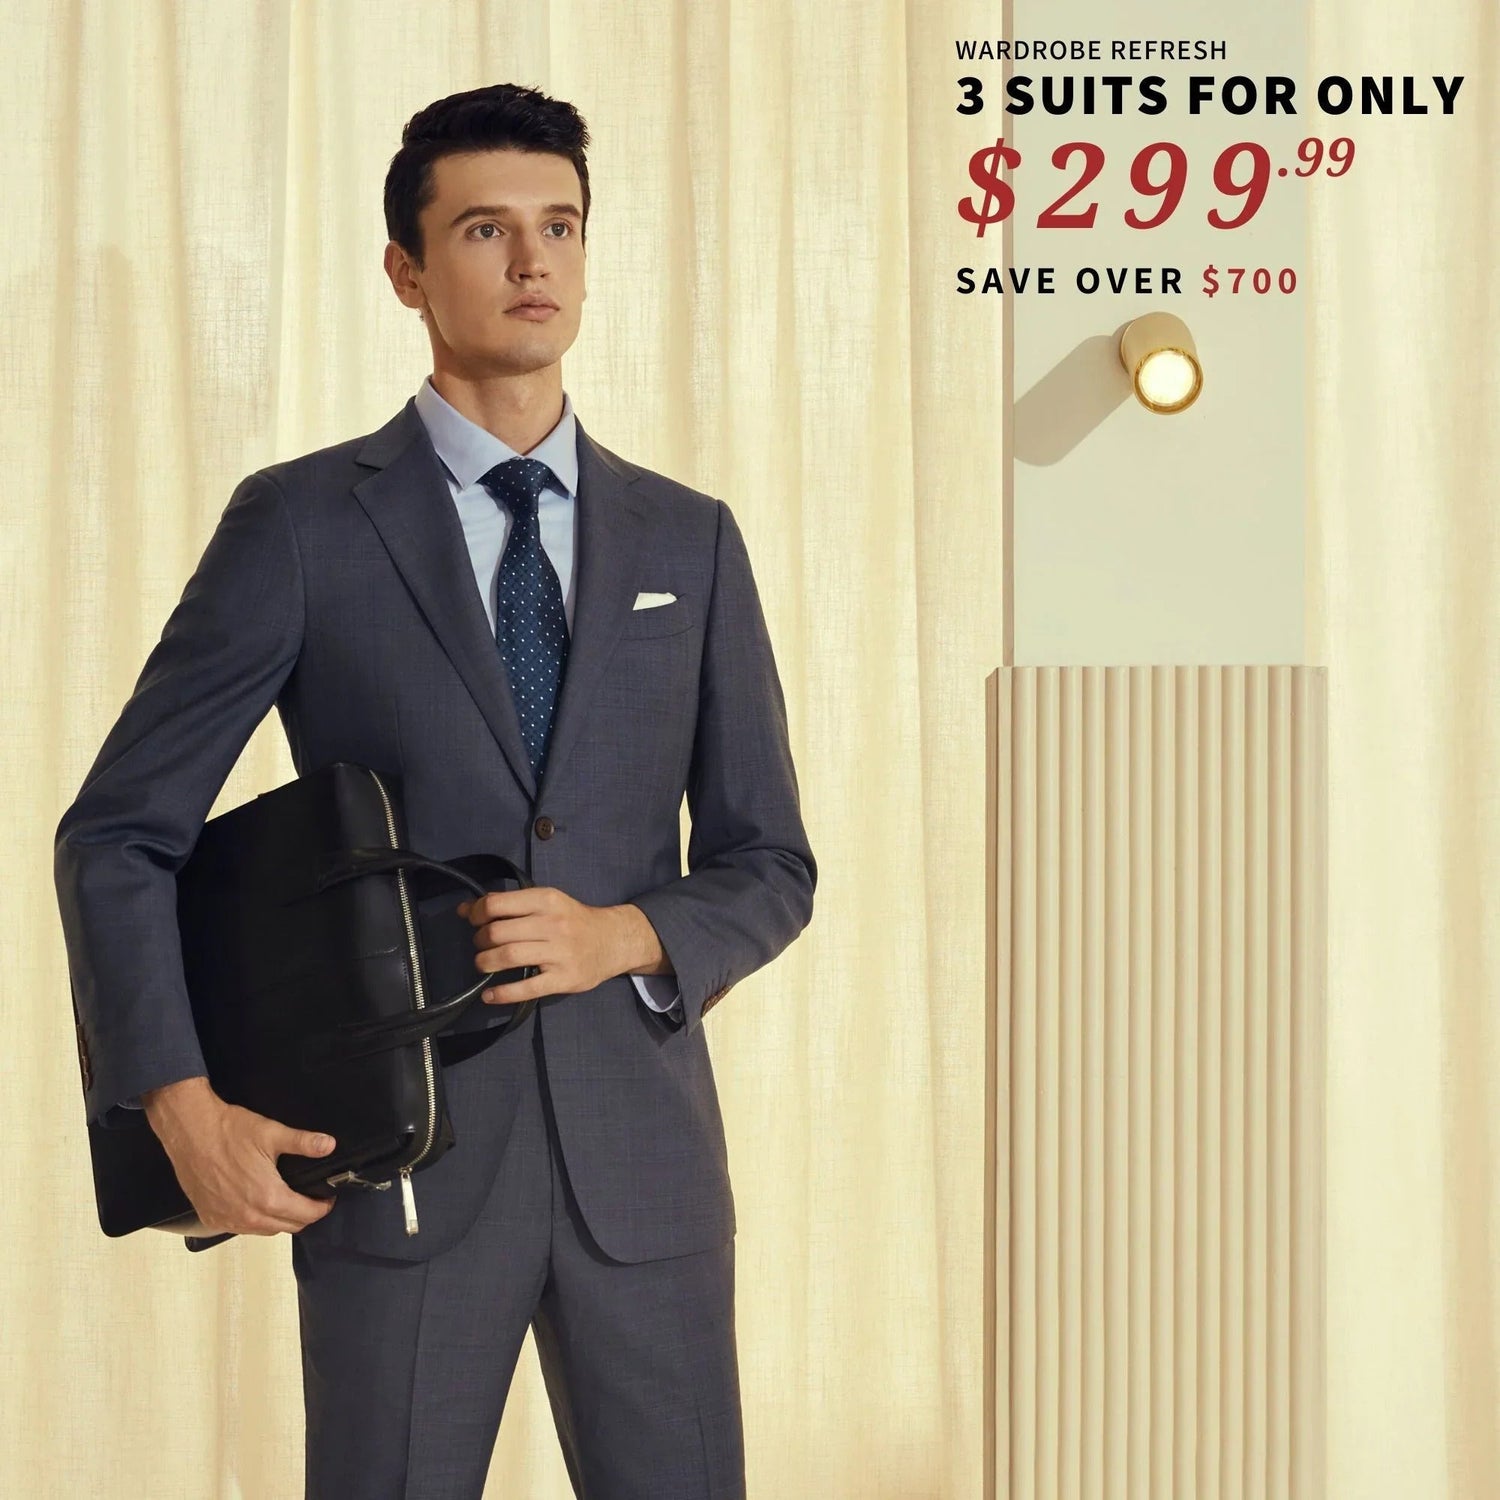 A man in a suit is holding a briefcase, displaying his impeccable dress style with 3 Suits for $299 from BYOB.